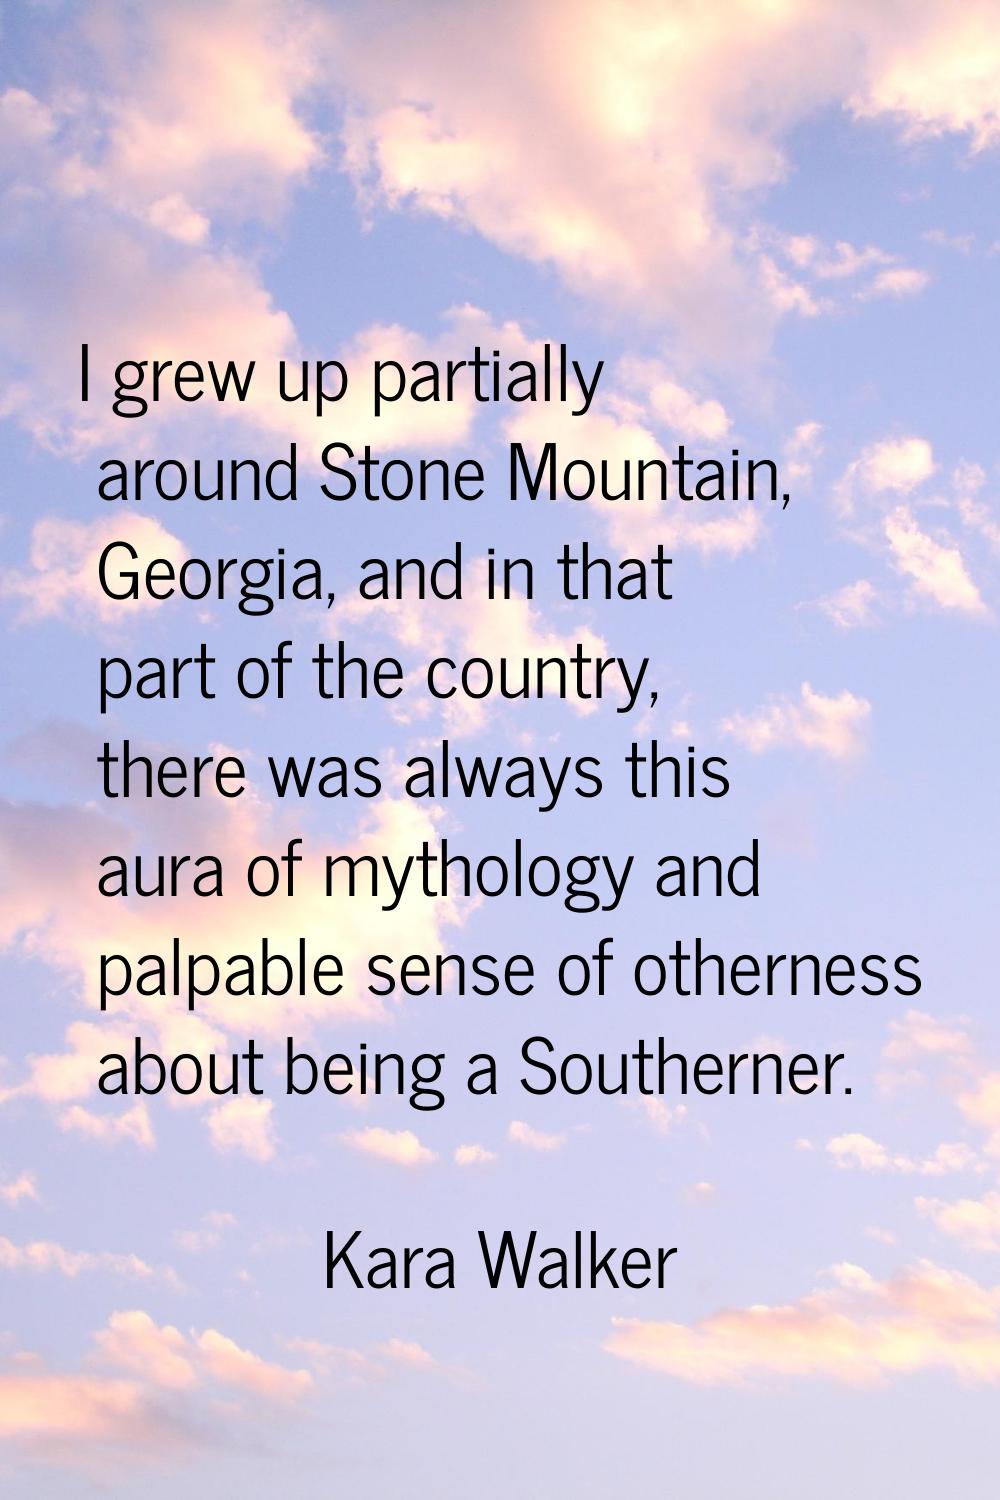 I grew up partially around Stone Mountain, Georgia, and in that part of the country, there was alwa